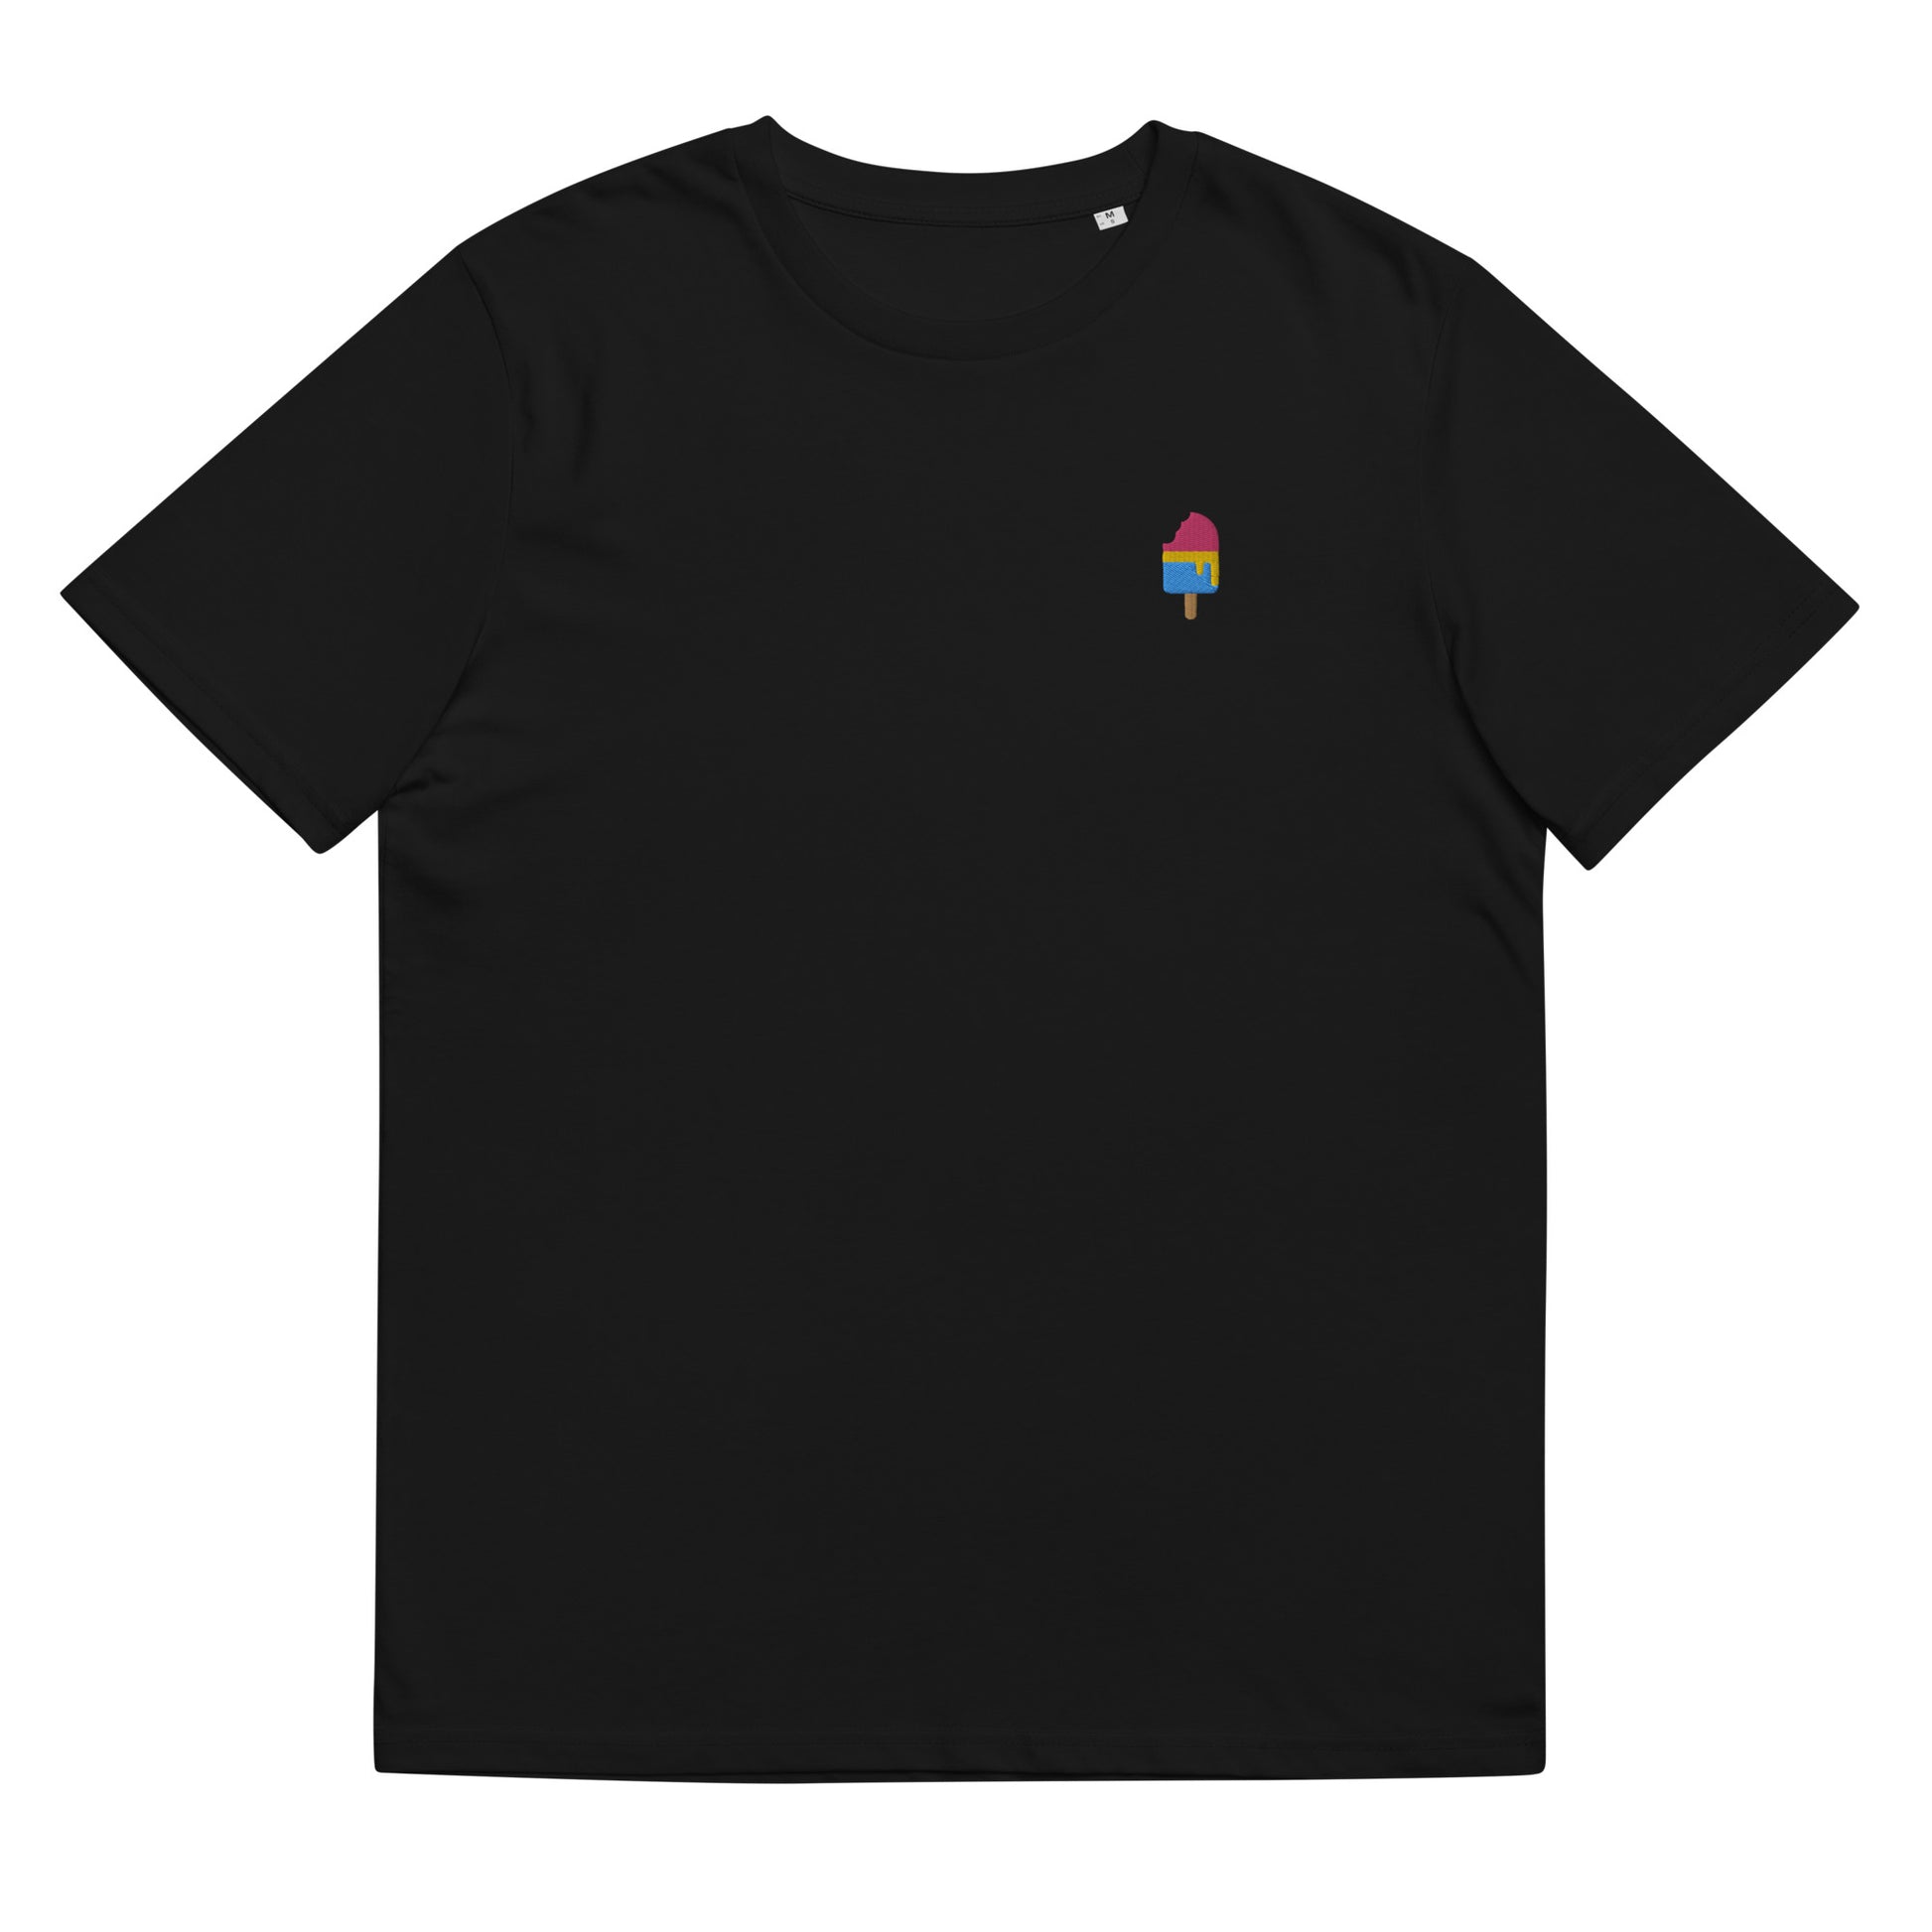 Fitted black organic cotton t-shirt with a small embroidered ice cream in pansexual colors on the left chest. Available in sizes S to 3XL.